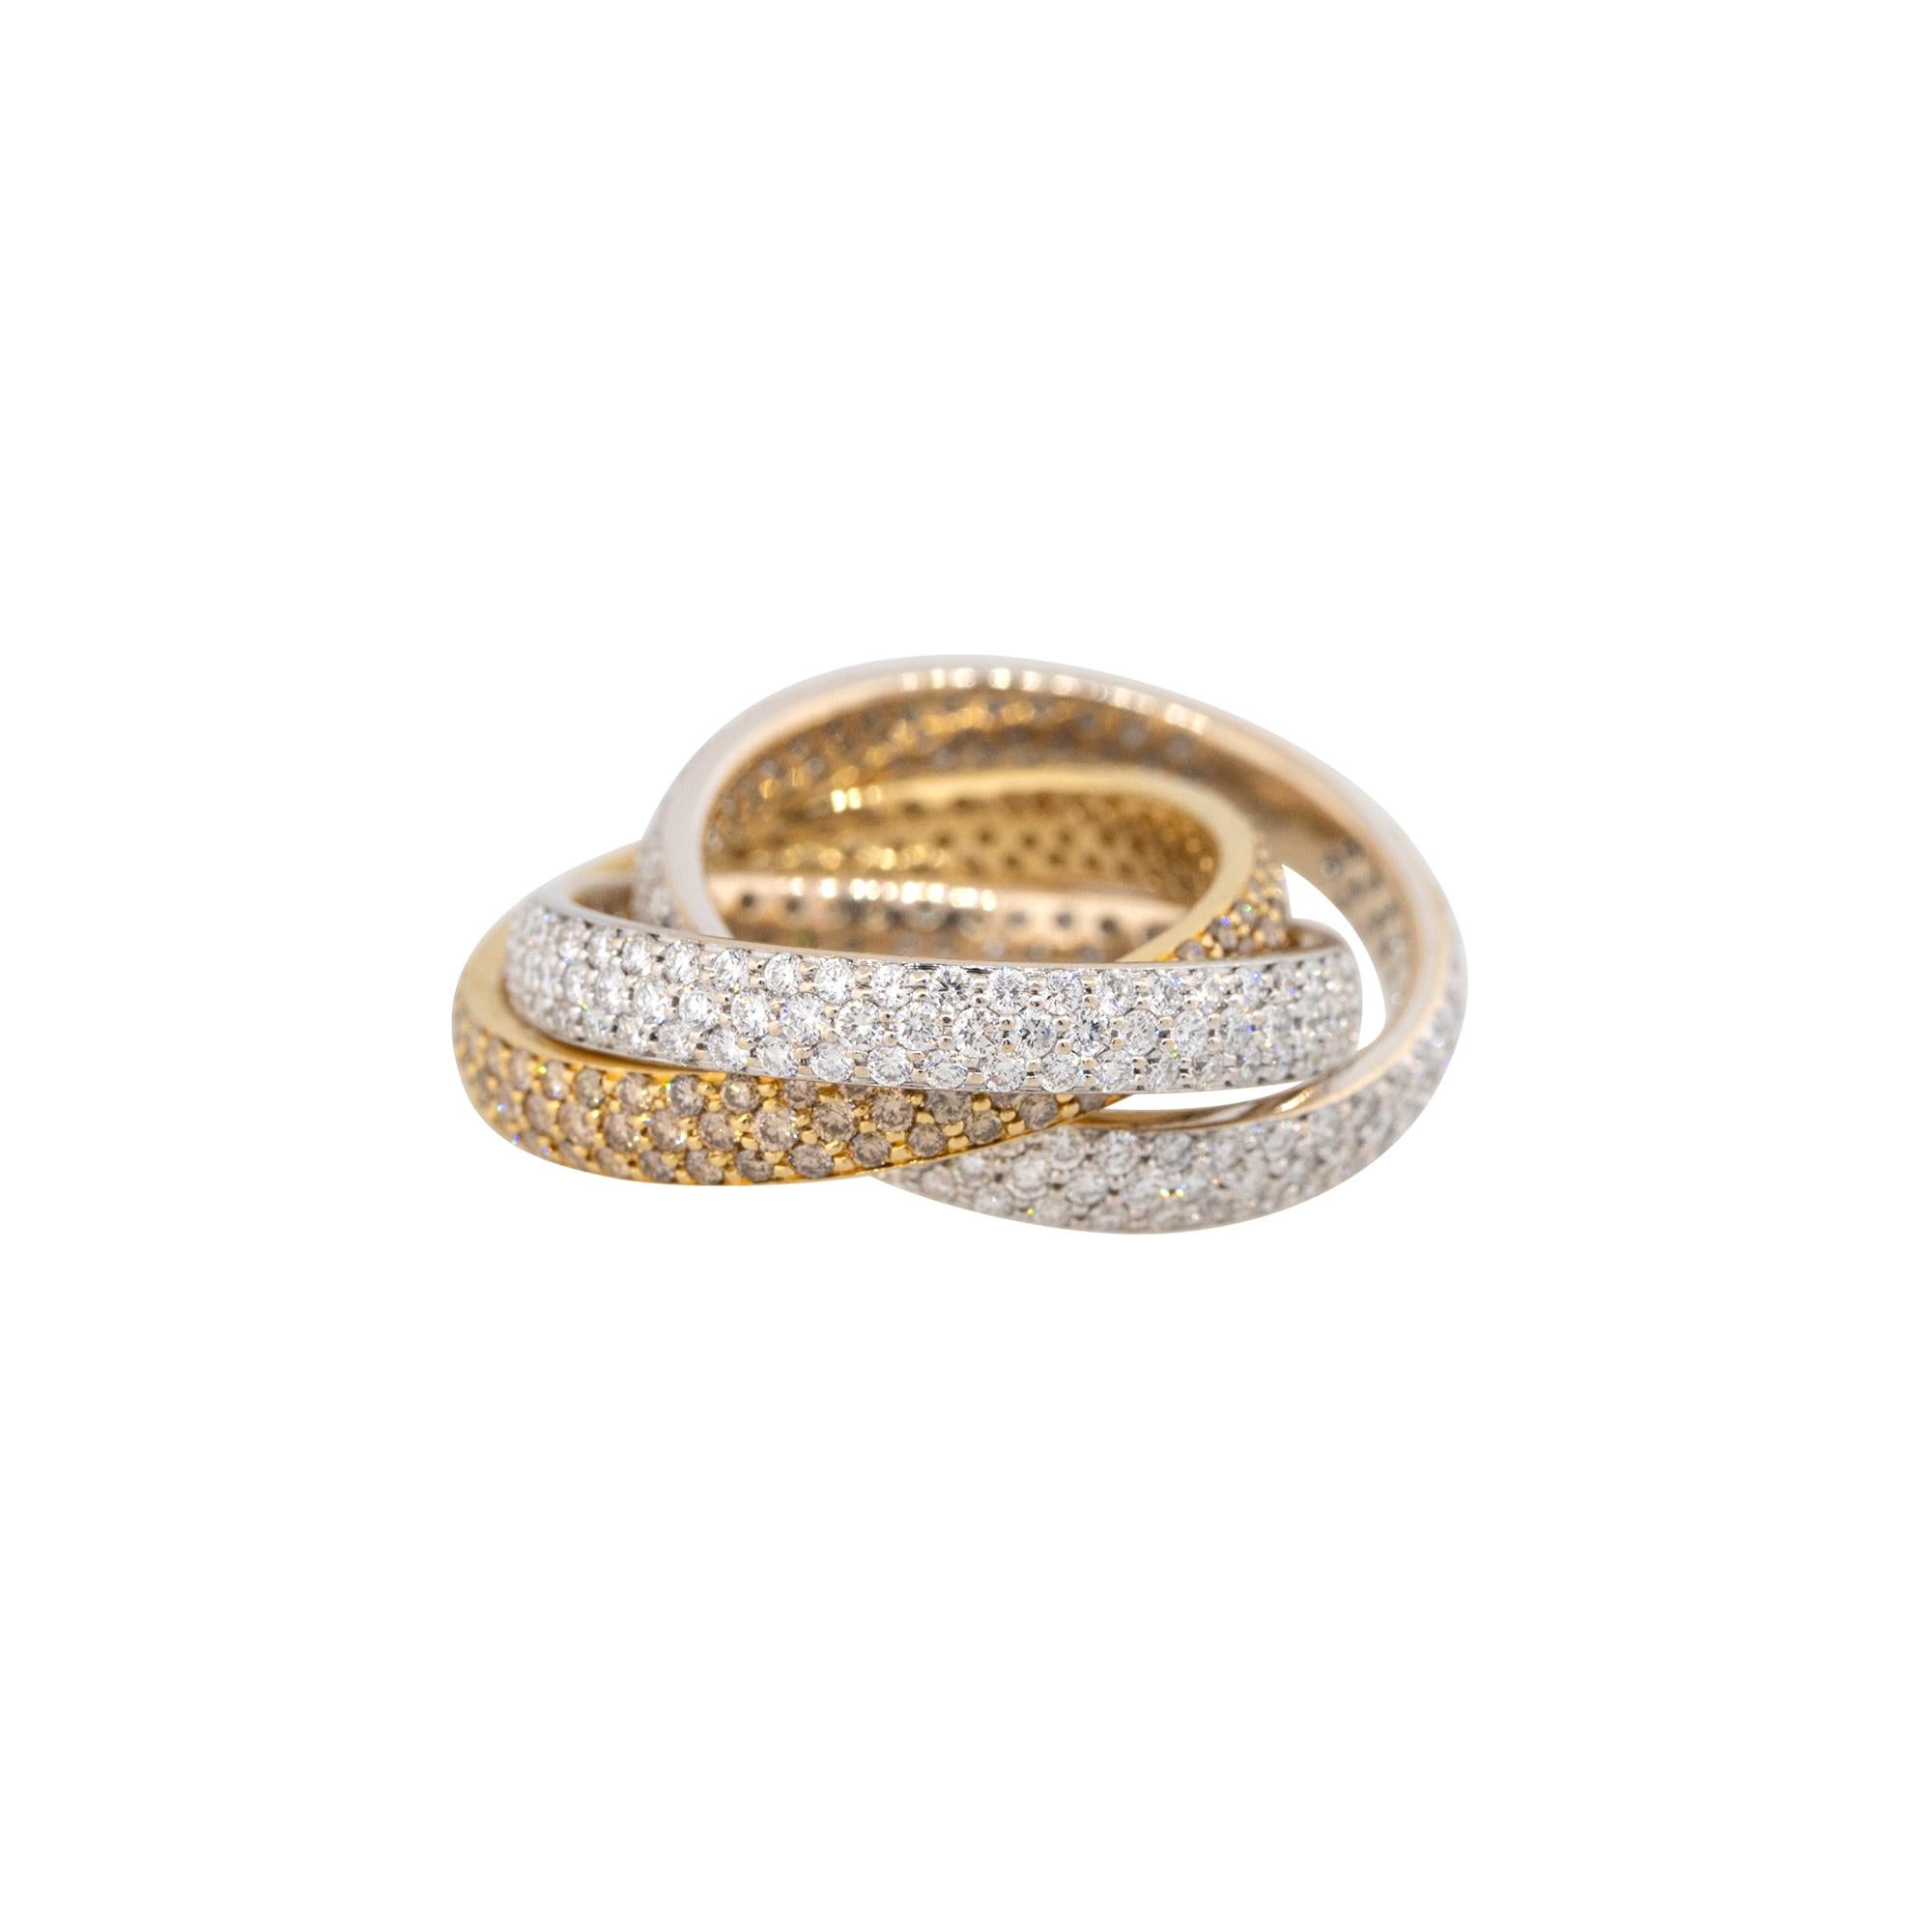 18 Karat Two-Tone Gold 2.75 Carats Pave Diamond Rolling Rings Set of 3
Style: Women's Diamond Rolling Ring Set of 3
Material: 18 Karat White and Yellow Gold
Diamond Details: The diamonds are approximately 2.75 carats of pave set round brilliant